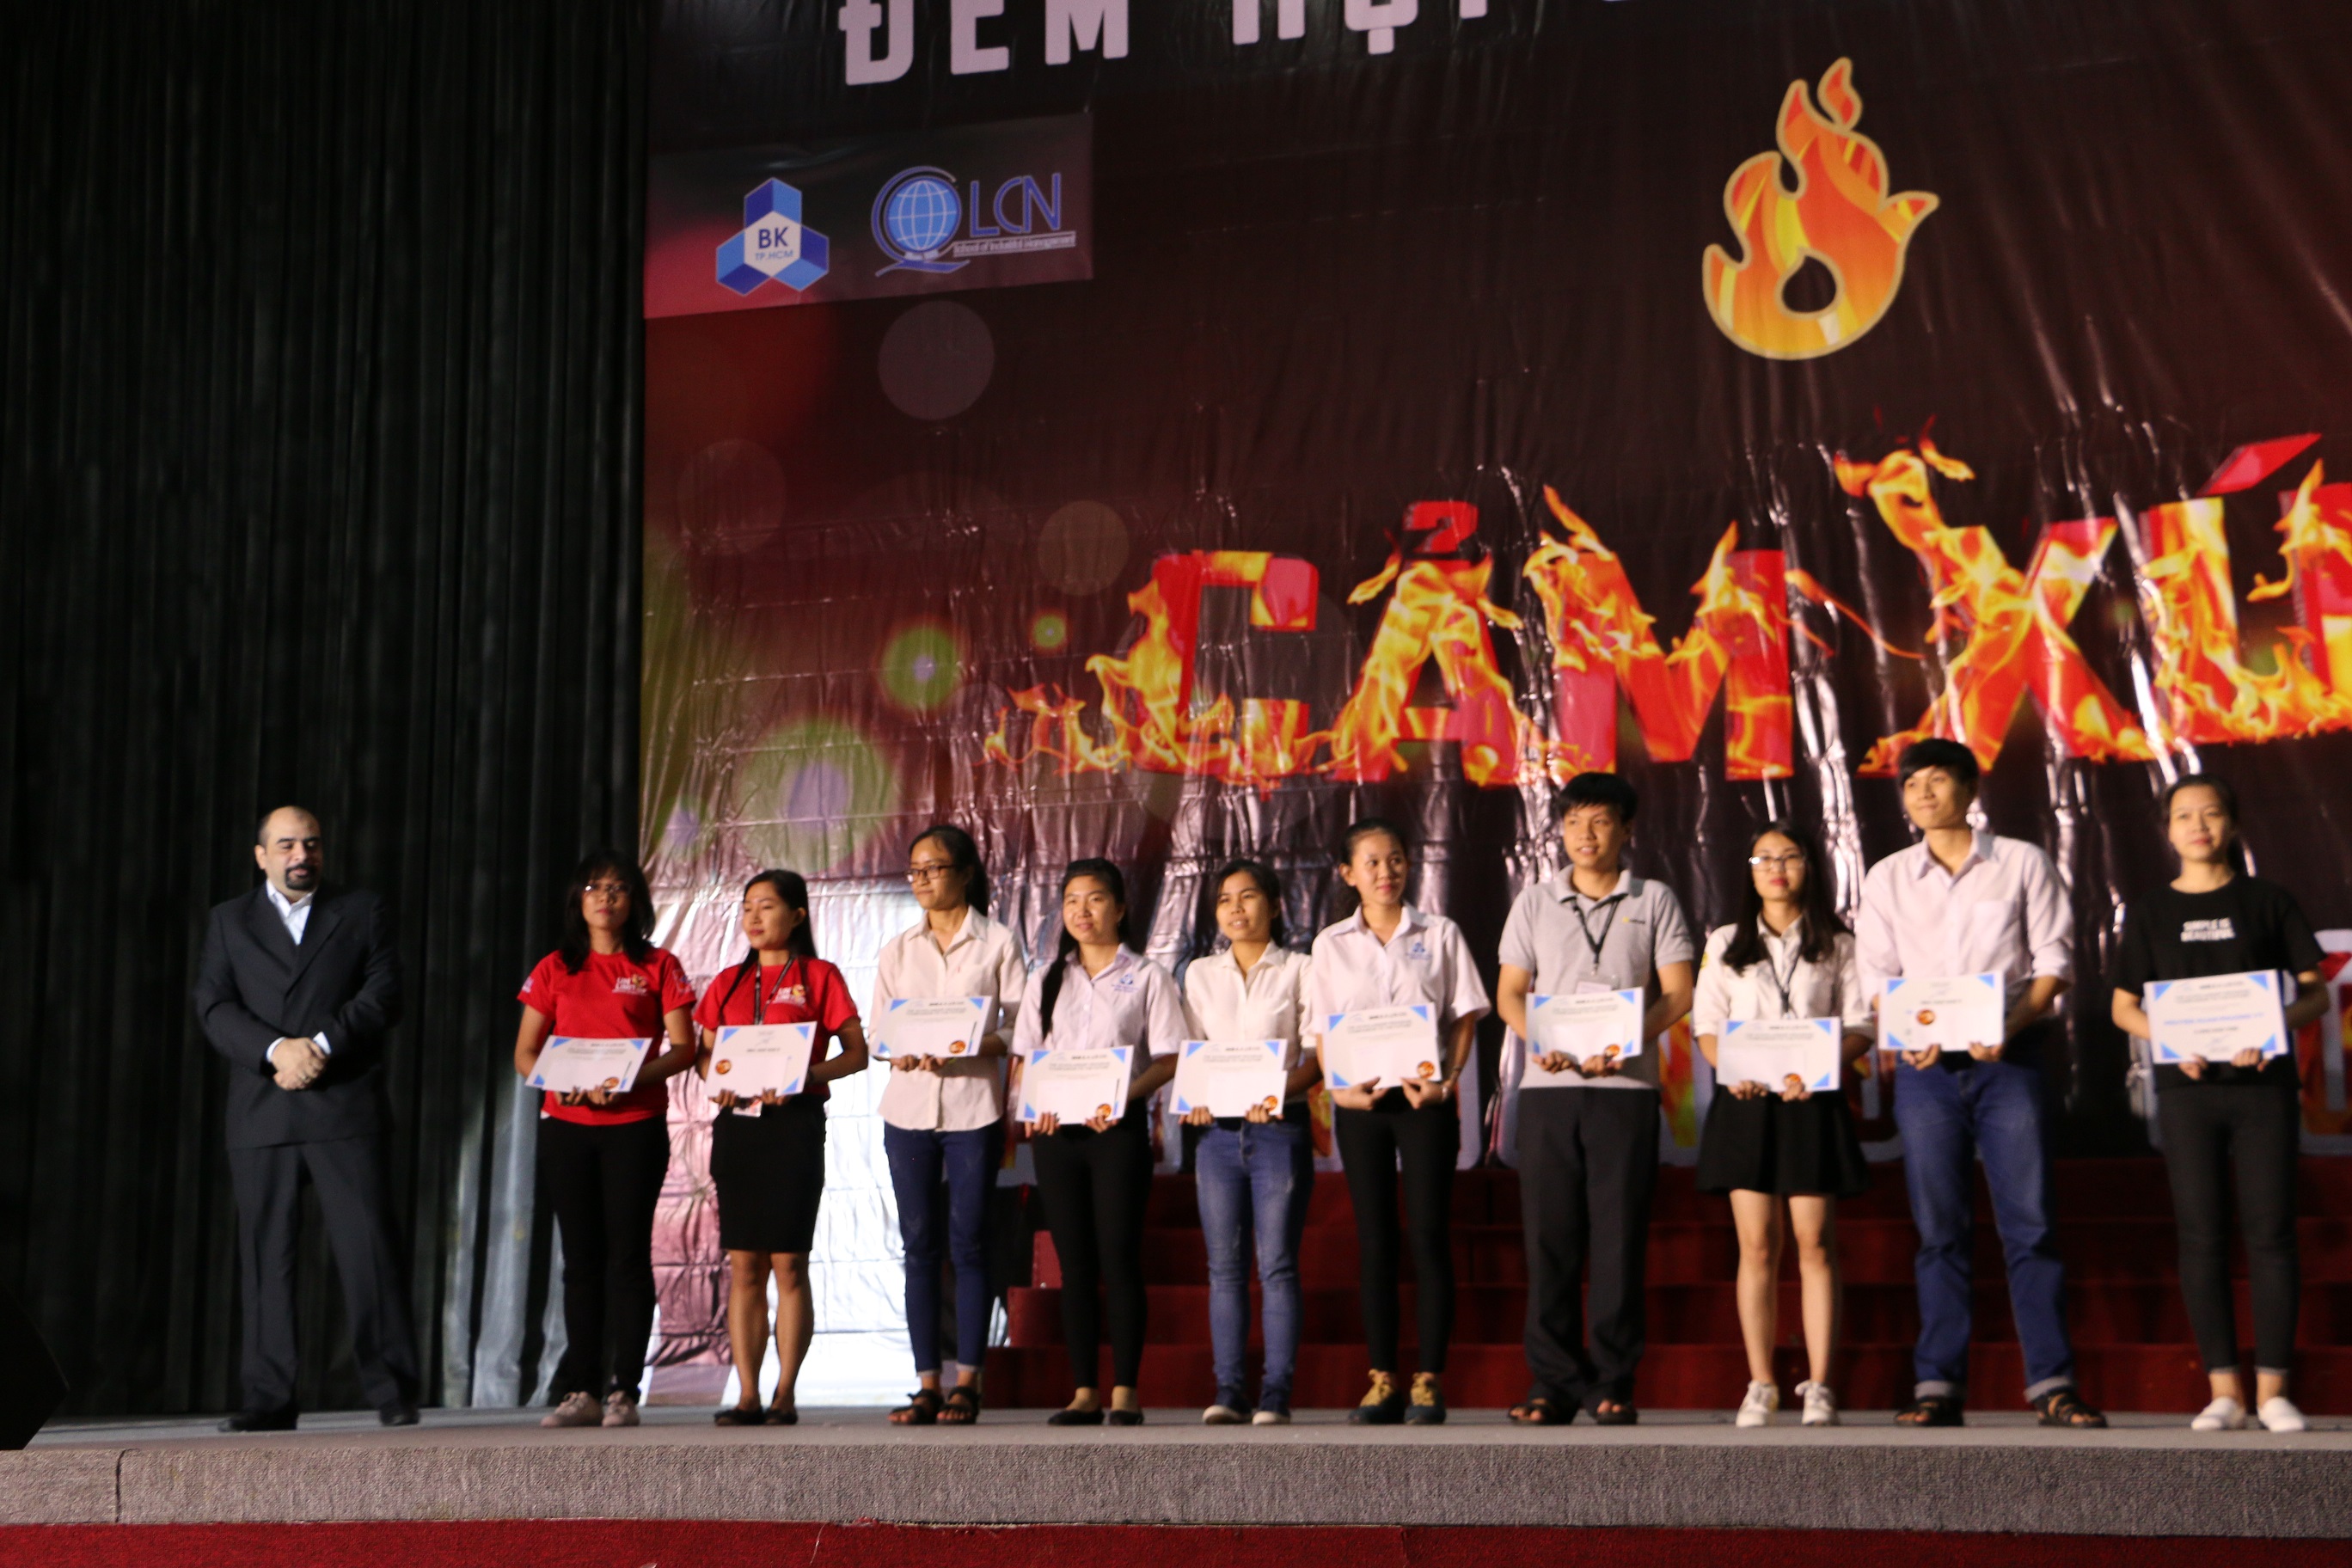 BMB Steel gave the scholarship to the School 4